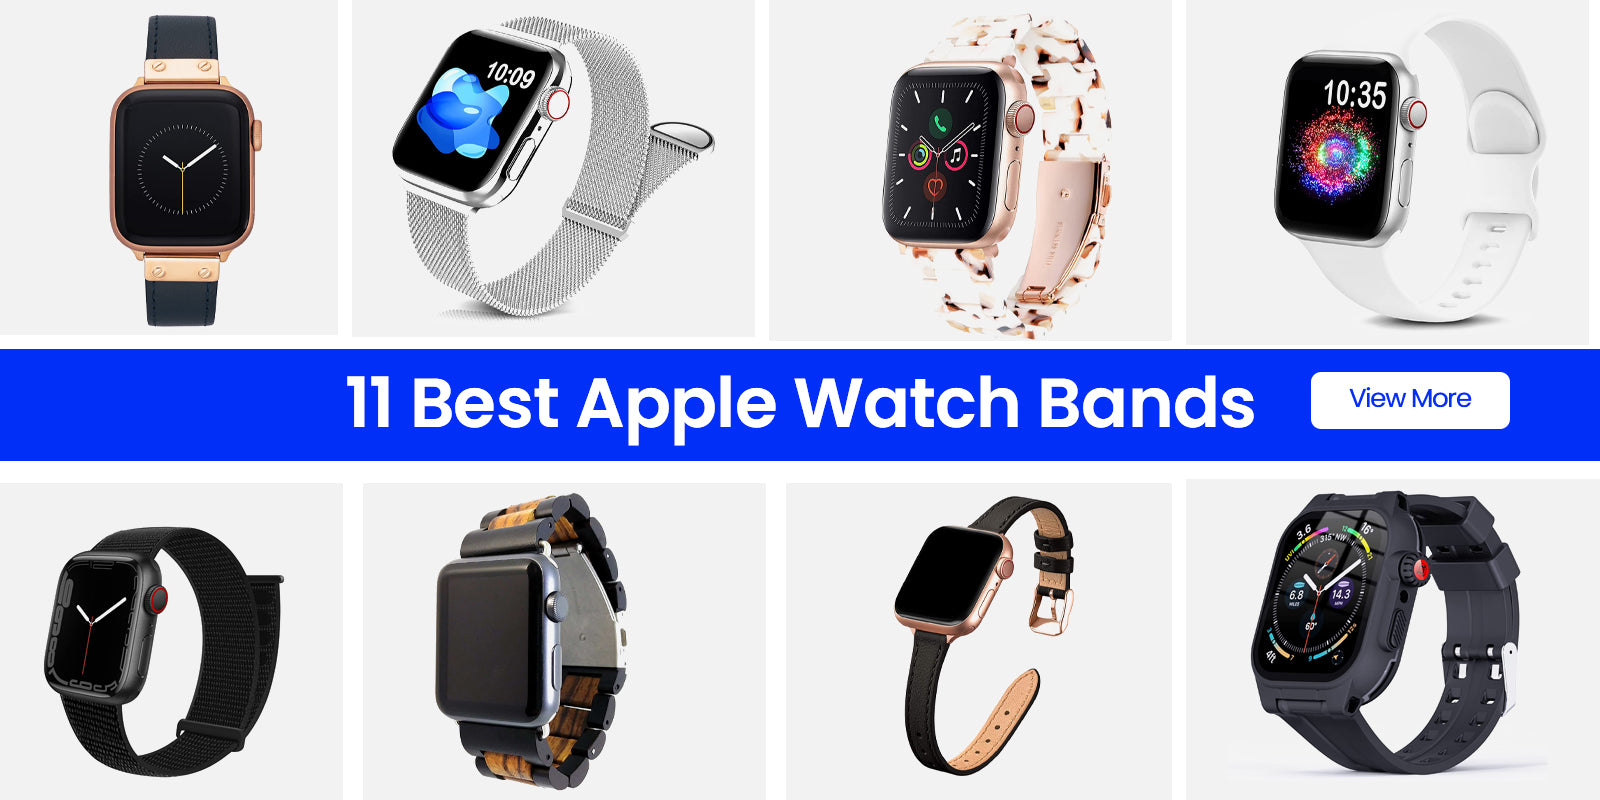 Best Apple Watch Bands To Buy in 2023 - IGN